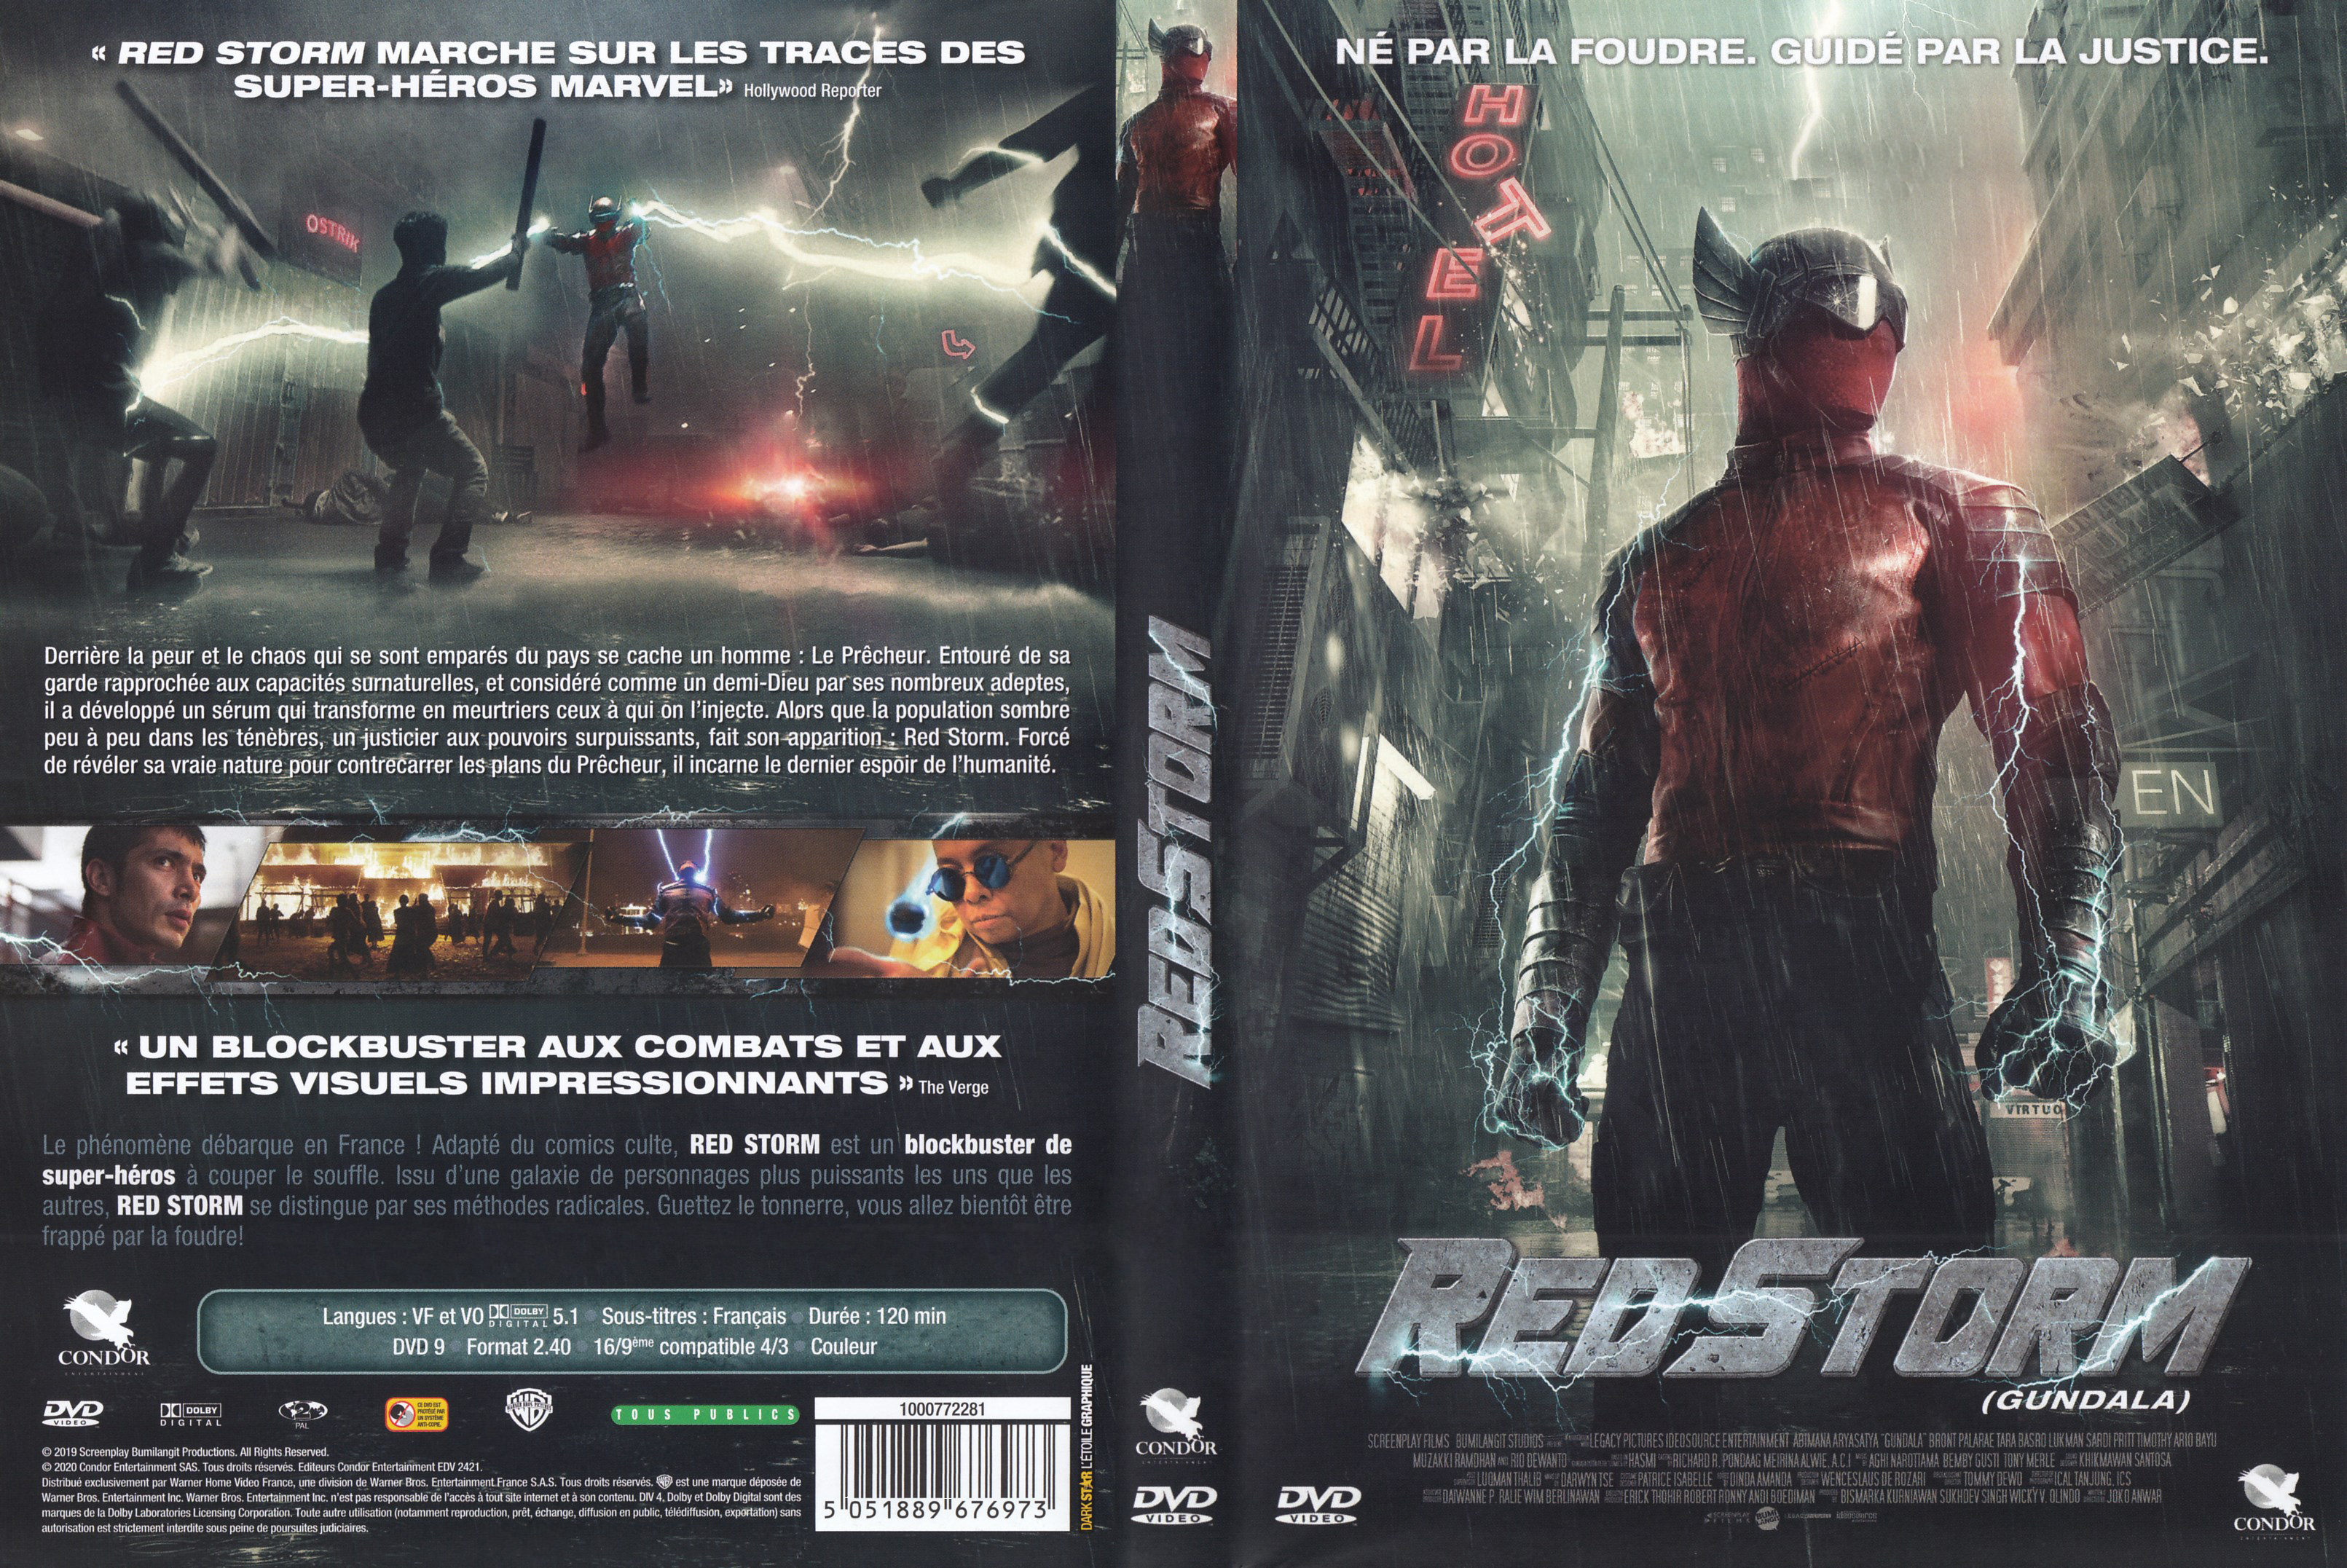 Jaquette DVD Red storm